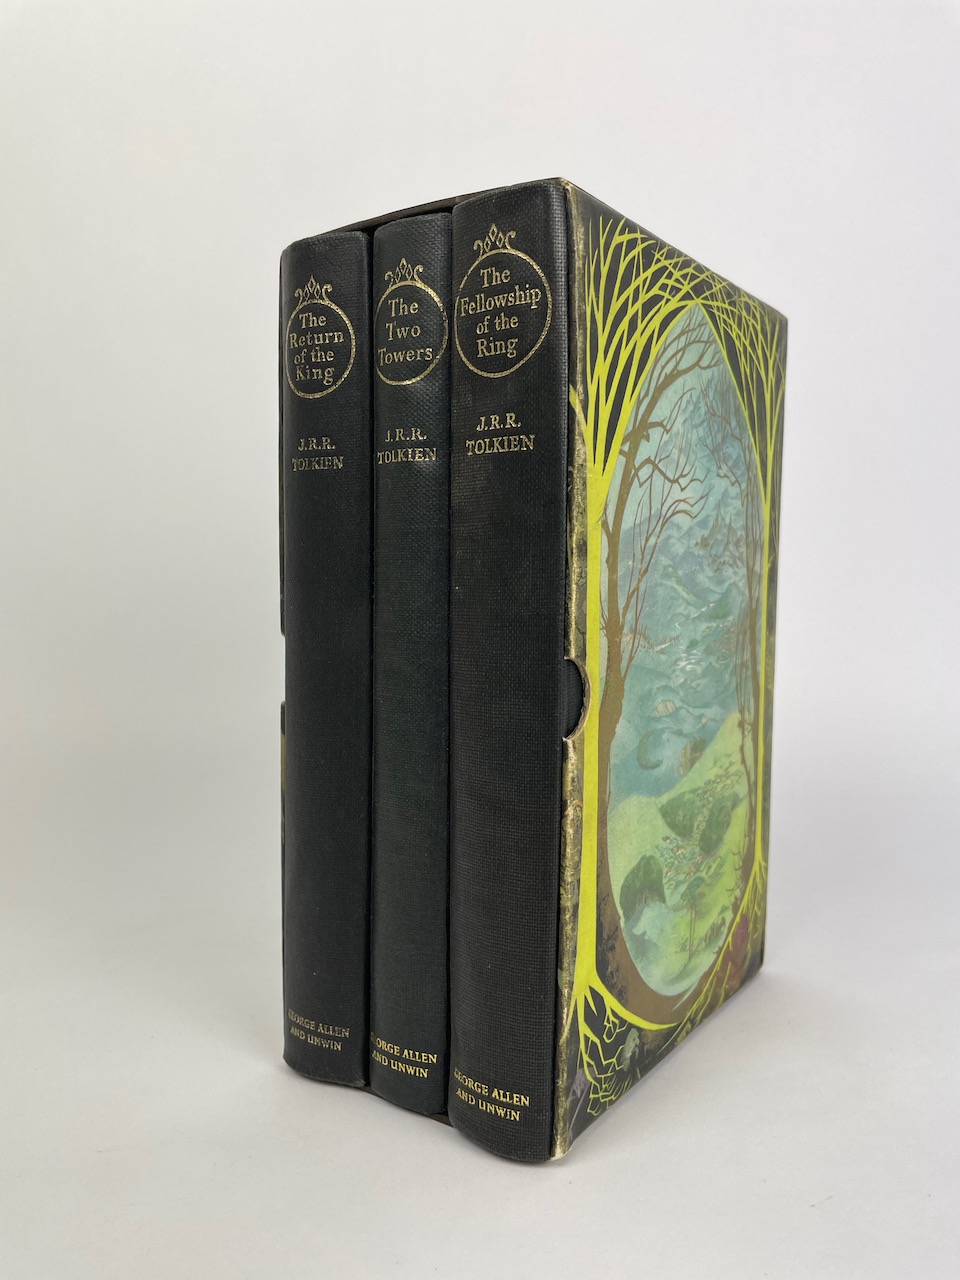 Oorlogsschip Oprecht Goedaardig Rare, Limited, signed and numbered editions of The Lord of the Rings by  J.R.R. Tolkien